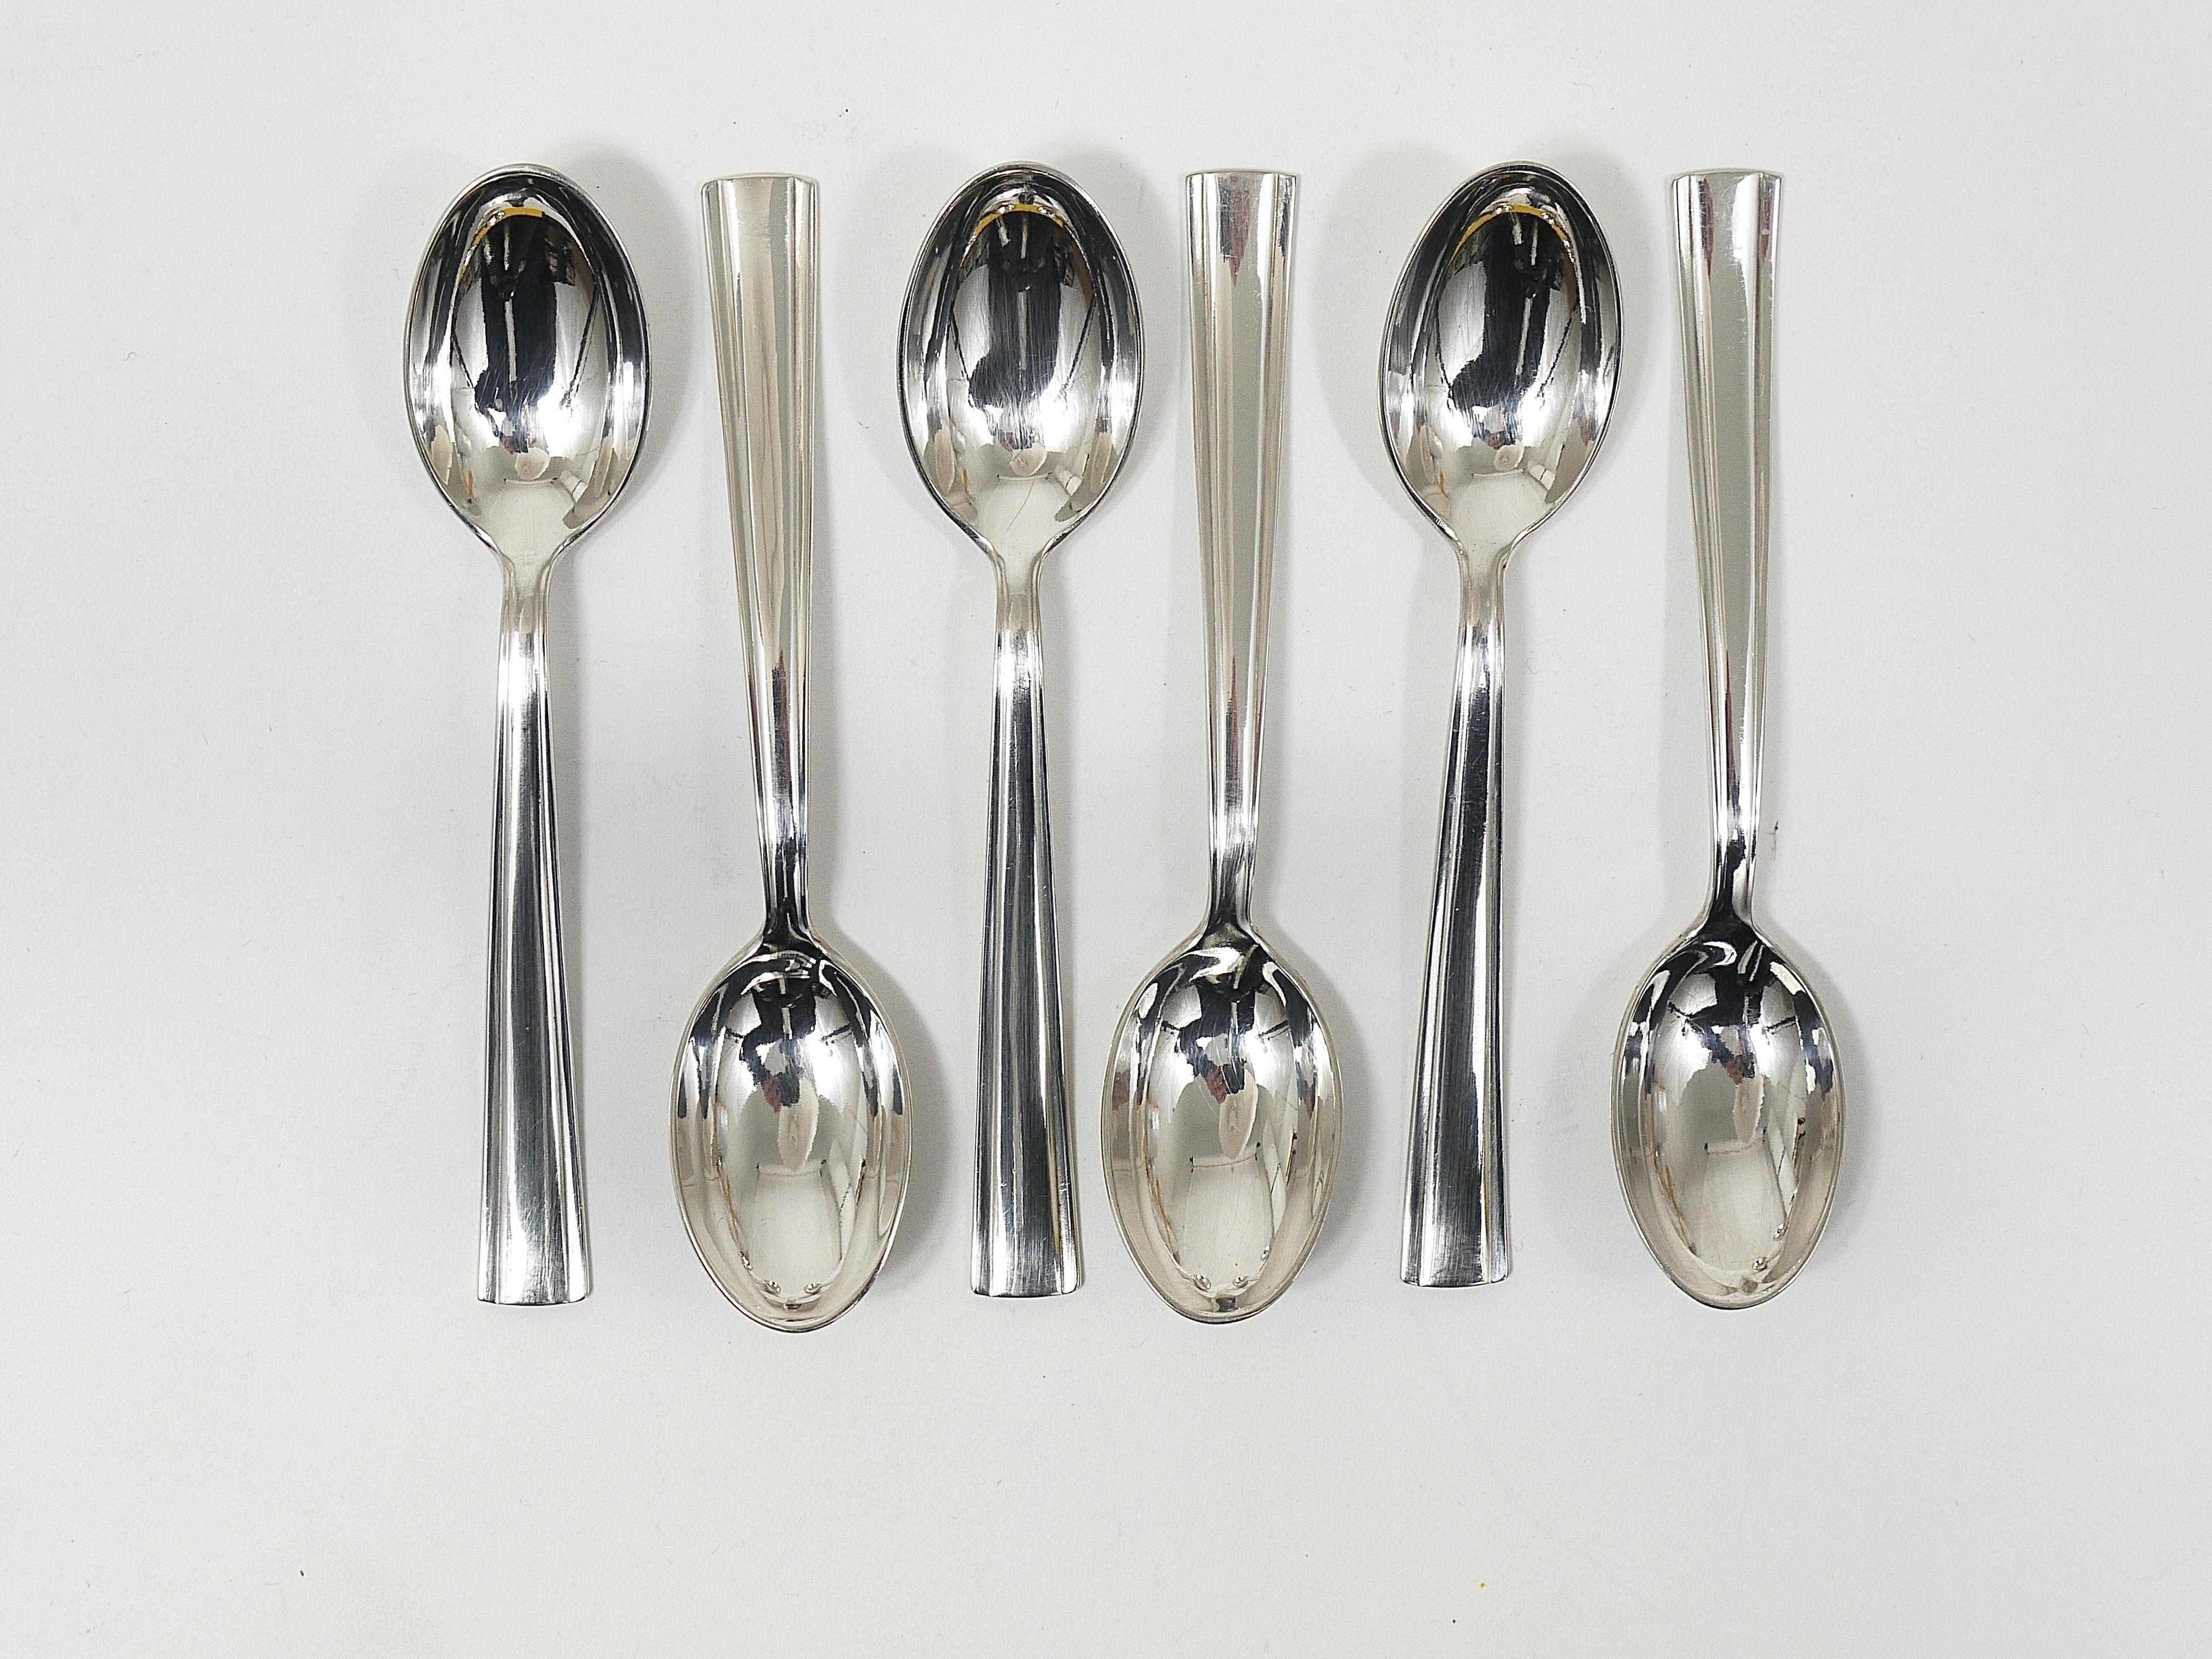 Gio Ponti for Krupp Silvered Flatware Cutlery for Six, 31 pcs., Austria, 1950s For Sale 6